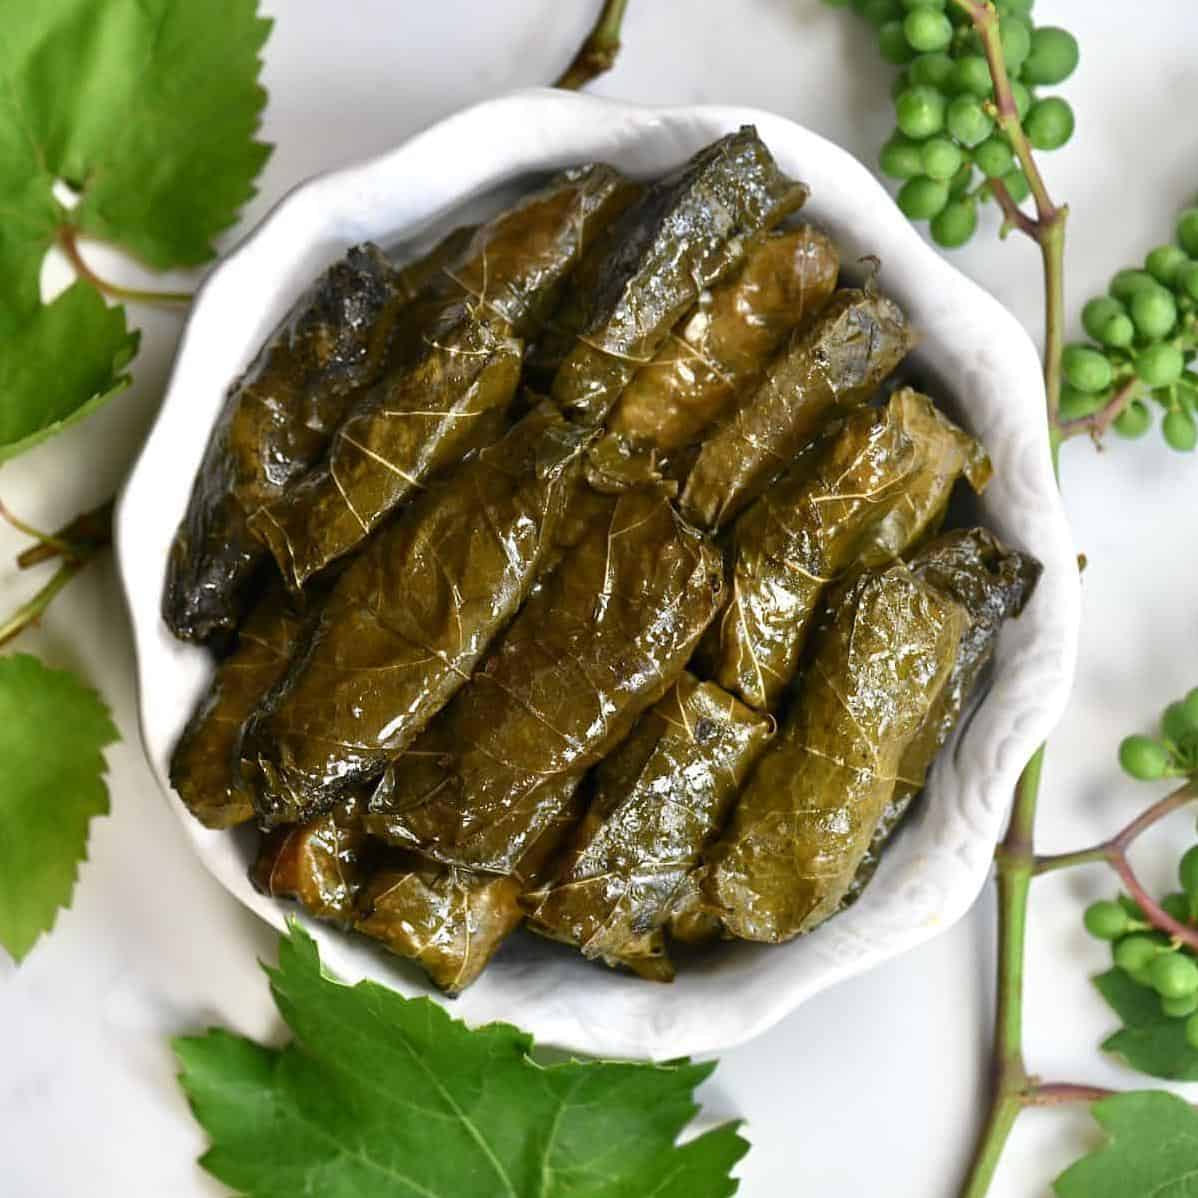  These delectable stuffed grape leaves are the perfect appetizer for any dinner party!